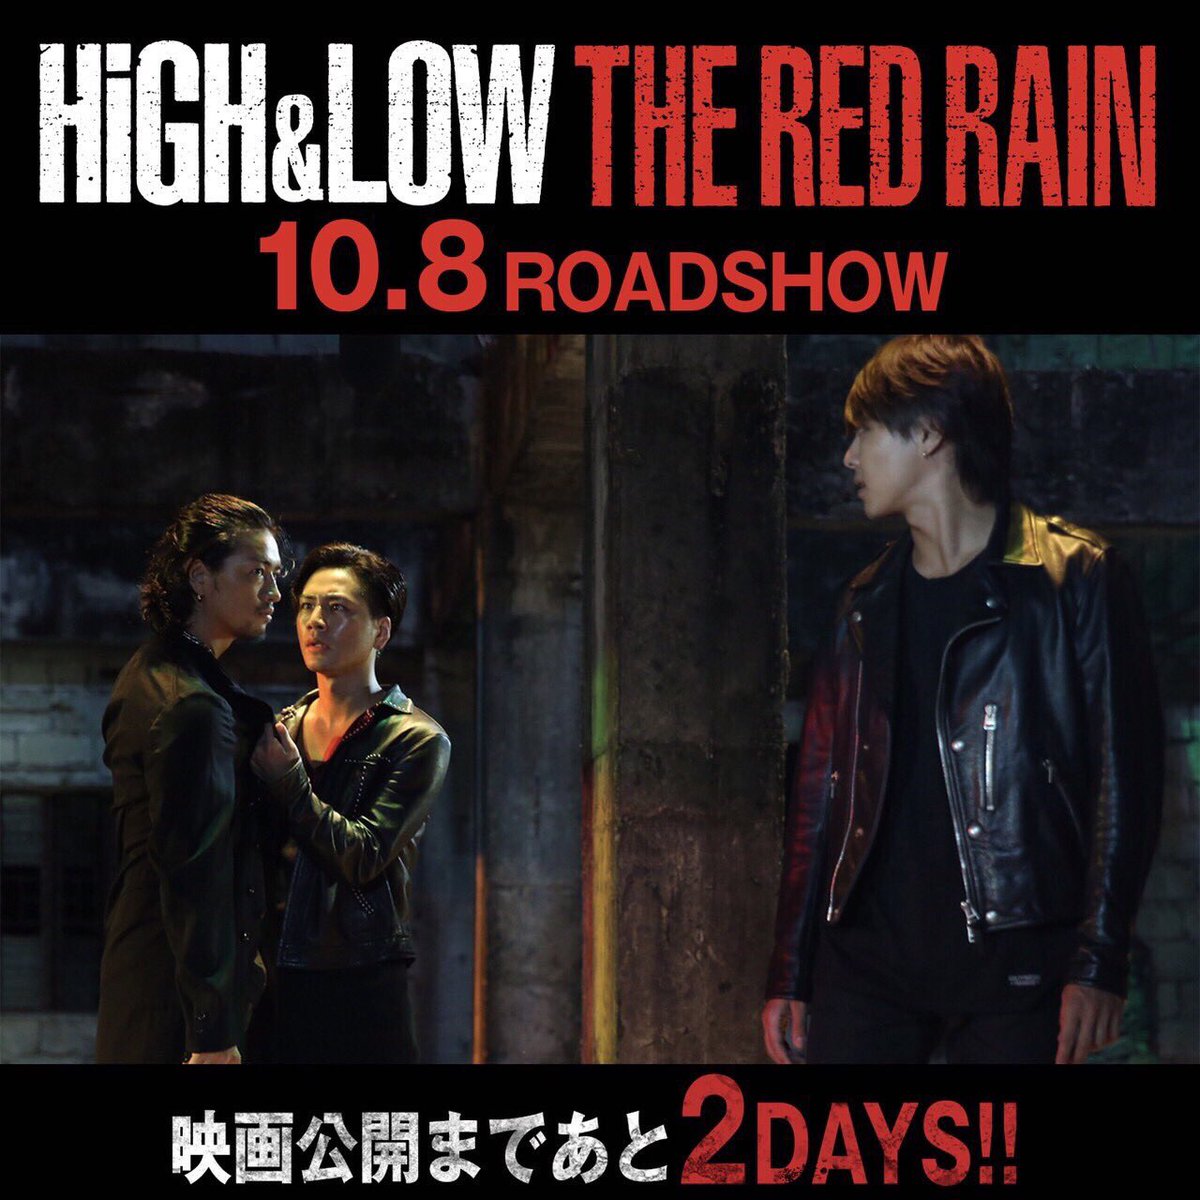 The Rampage Official High Low The Red Rain 2日後公開です 川村壱馬 High Lowtheredrain 雨宮兄弟 10月8日 Roadshow